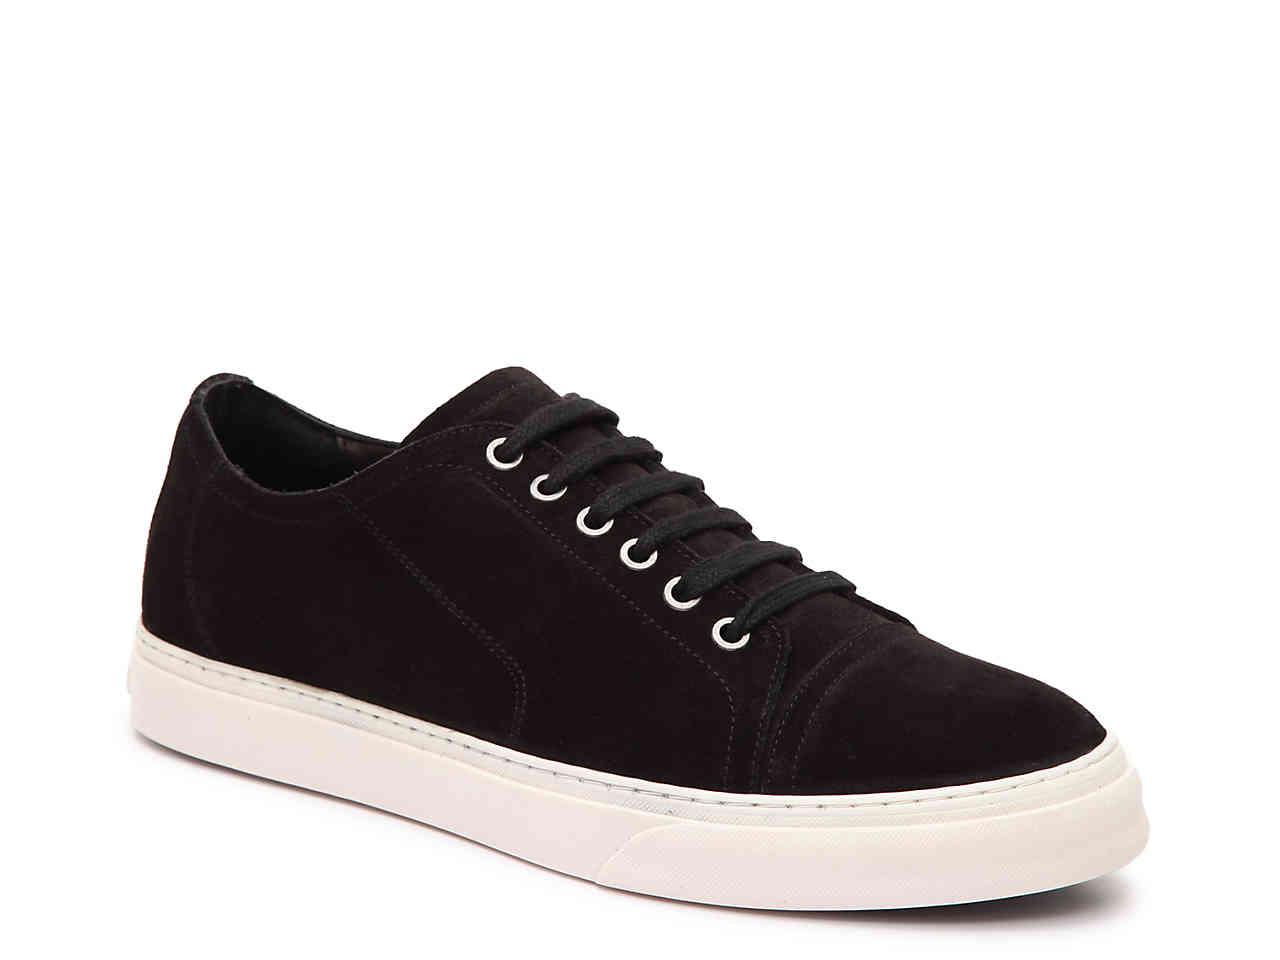 Vince Camuto Leather Quort Sneaker in Black for Men - Save 44% - Lyst